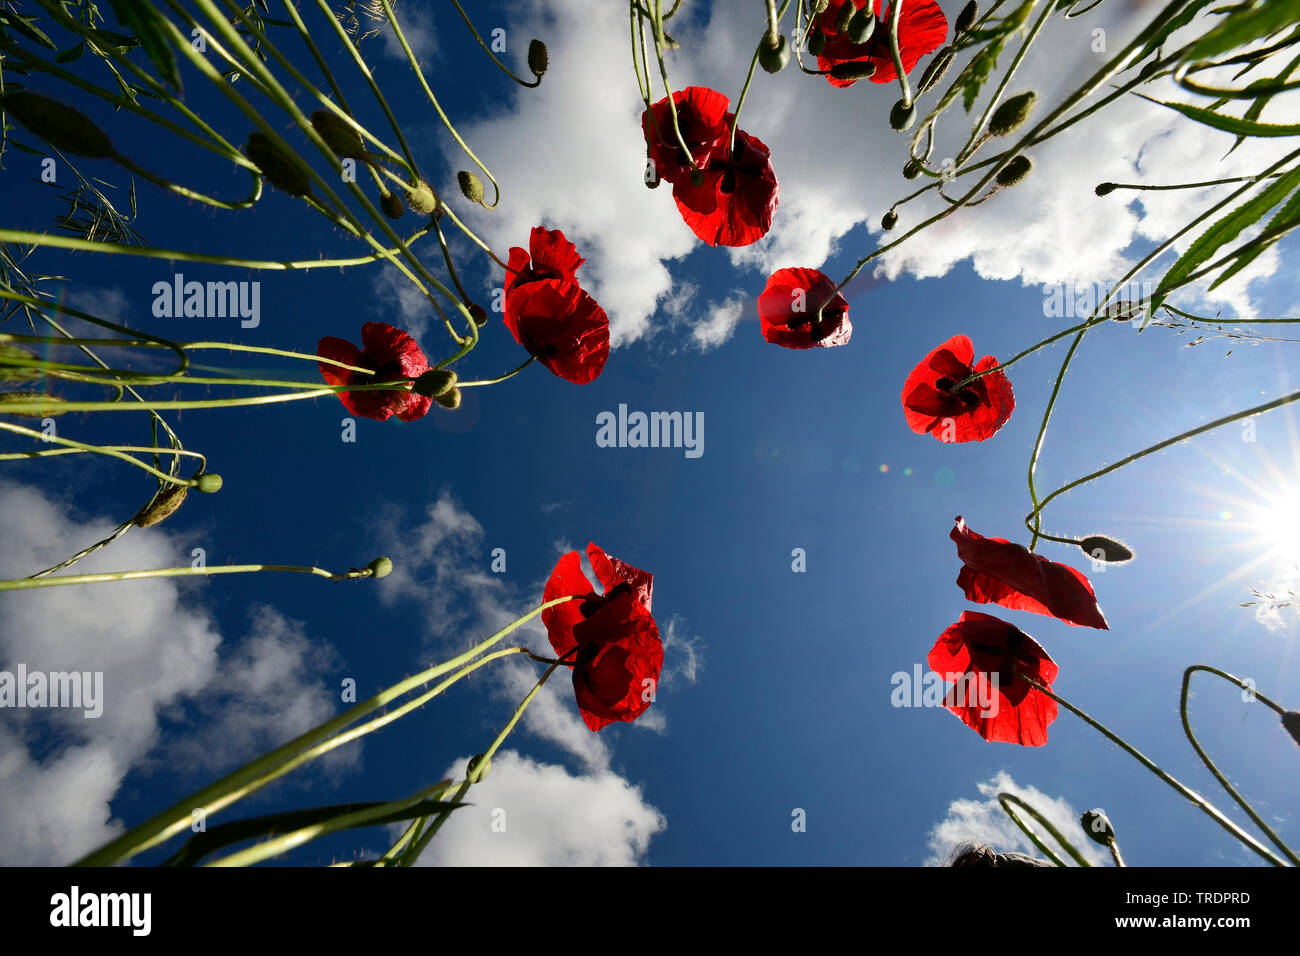 Common poppy, Corn poppy, Red poppy (Papaver rhoeas), Poppy's with clouds in the background, Hungary Stock Photo